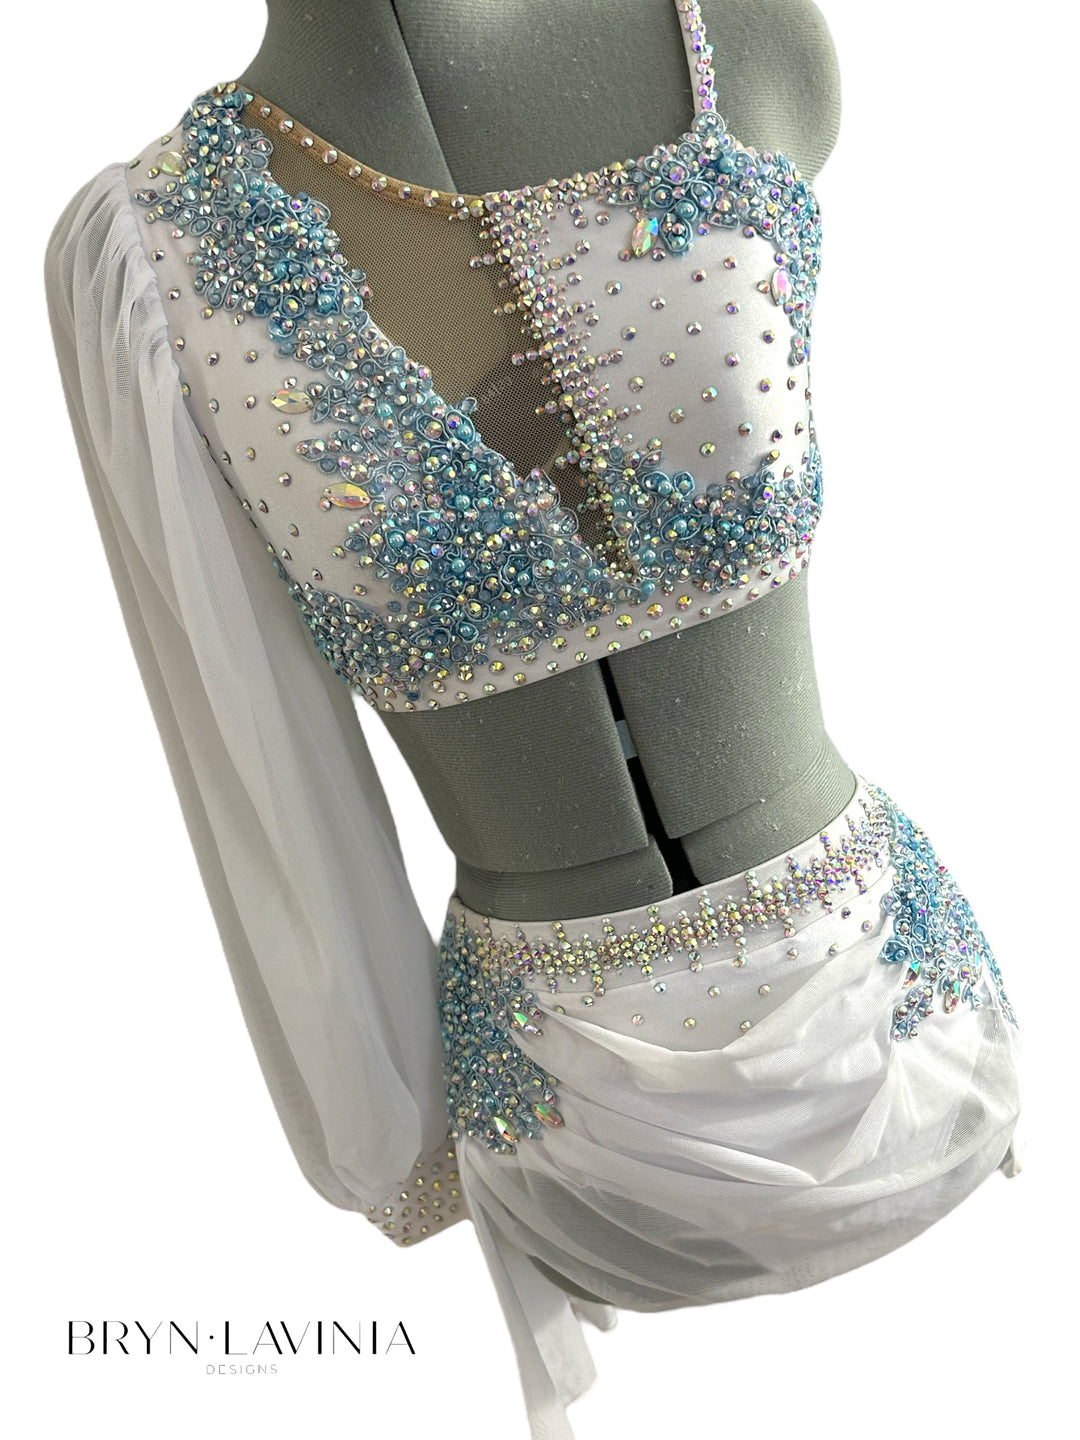 NEW Adult Small white/light blue ready to ship costume